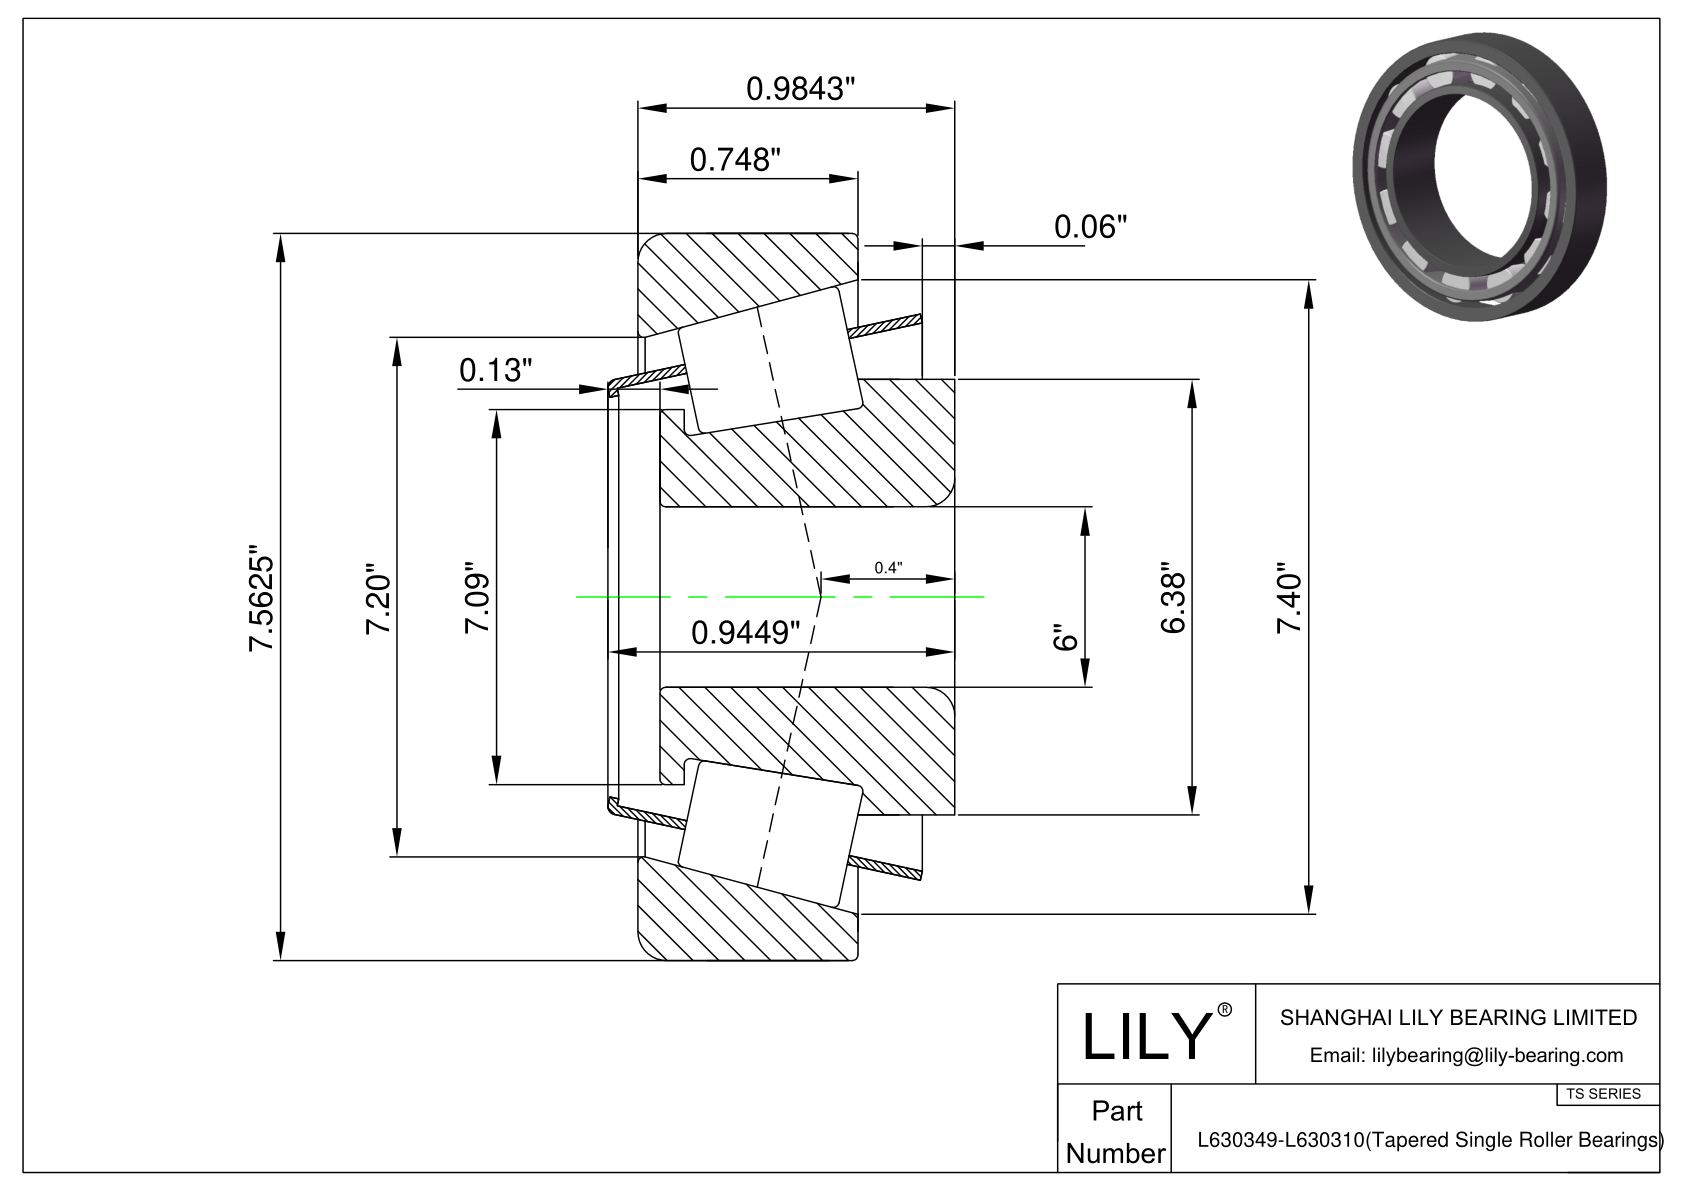 L630349-L630310 TS (Tapered Single Roller Bearings) (Imperial) cad drawing